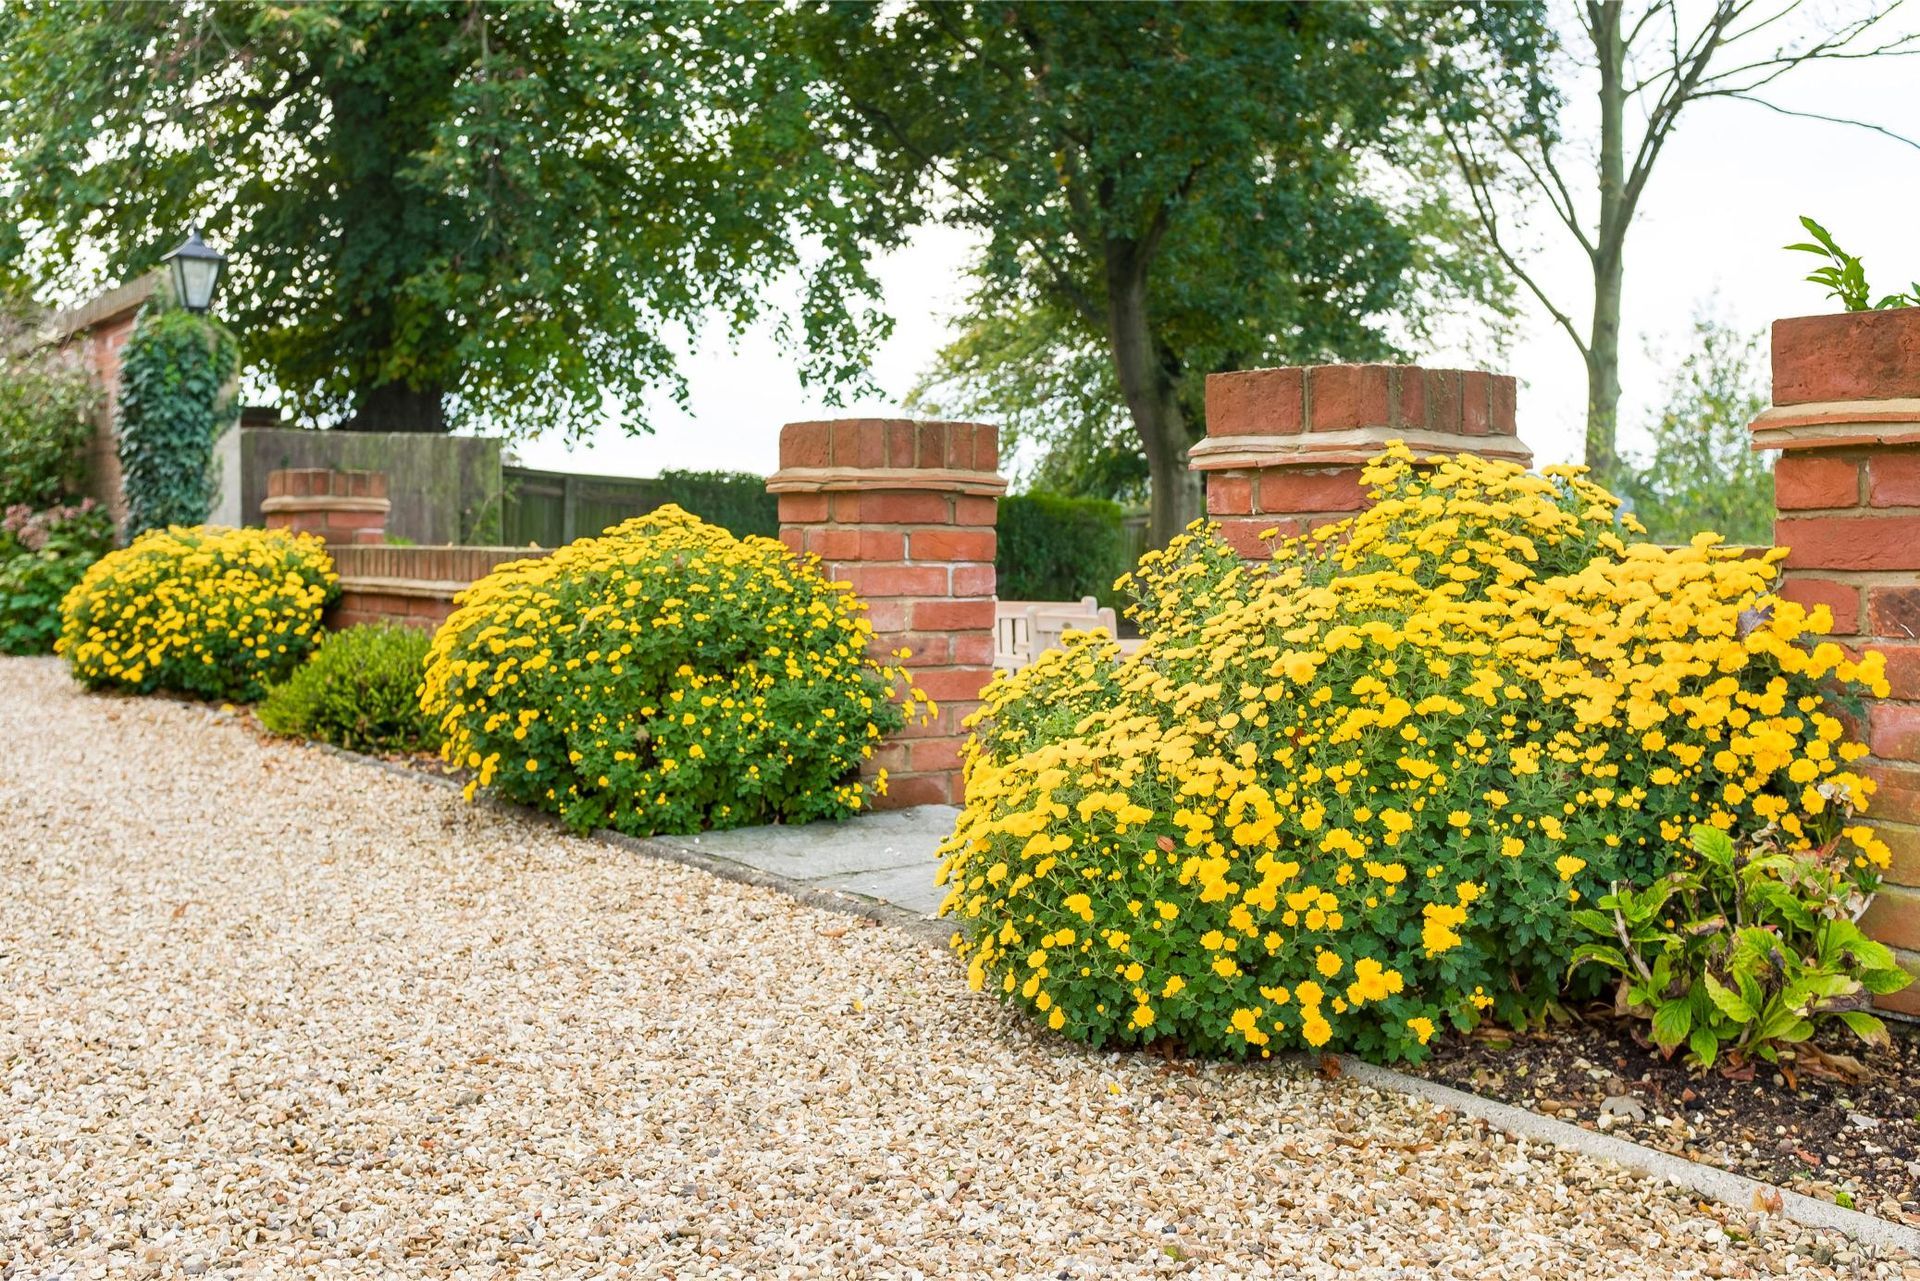 A gravel driveway with yellow flowers and brick pillars